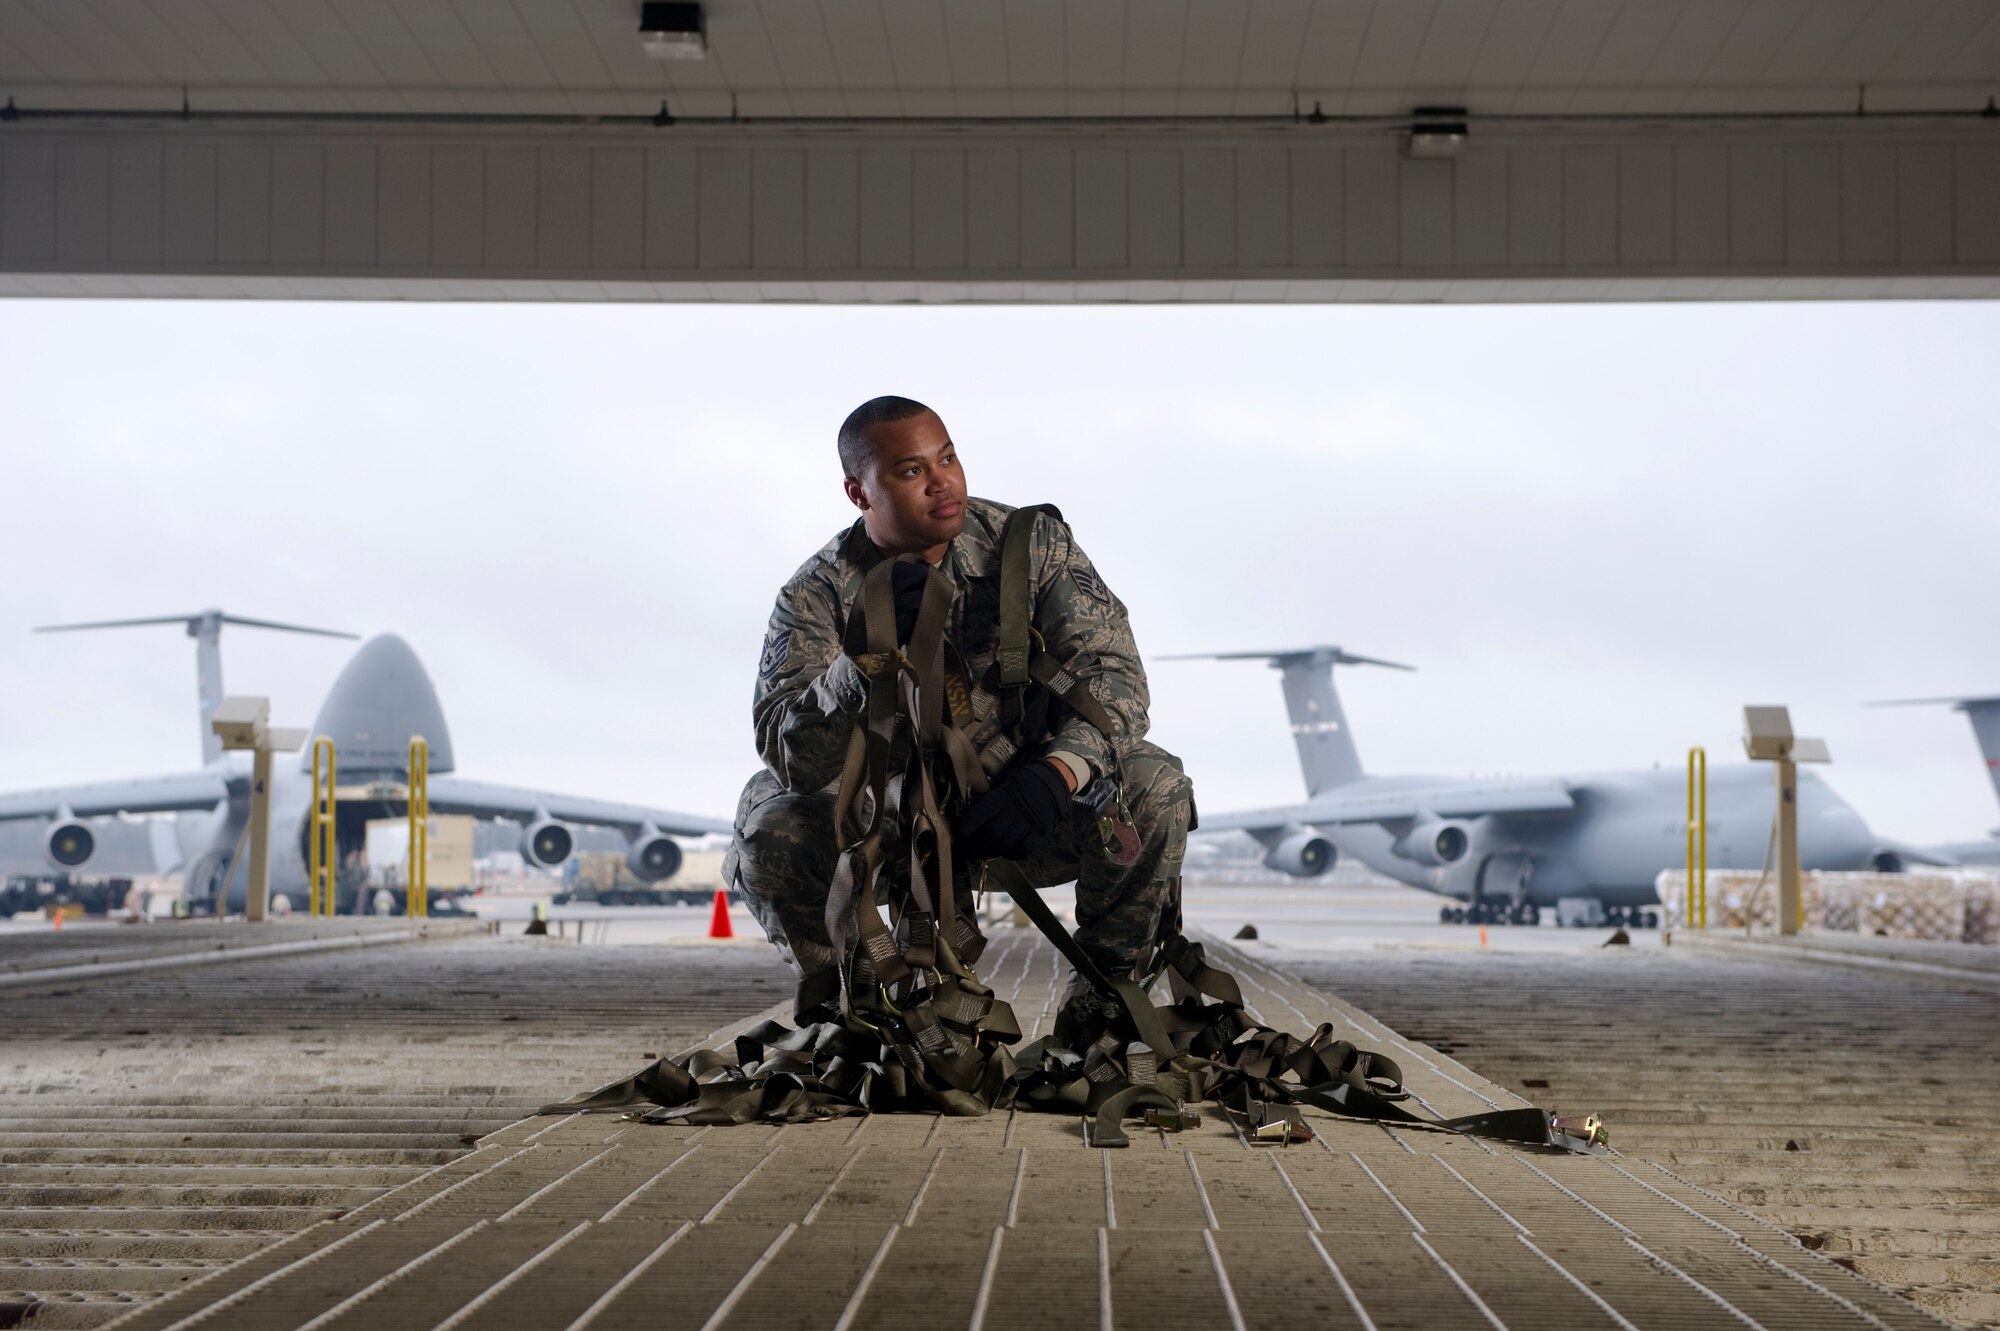 Staff Sgt. Rashard Coaxum represented the 81st Aerial Port Squadron in Stacy Pearsall’s portrait project. (Courtesy Photo by Stacy Pearsall)